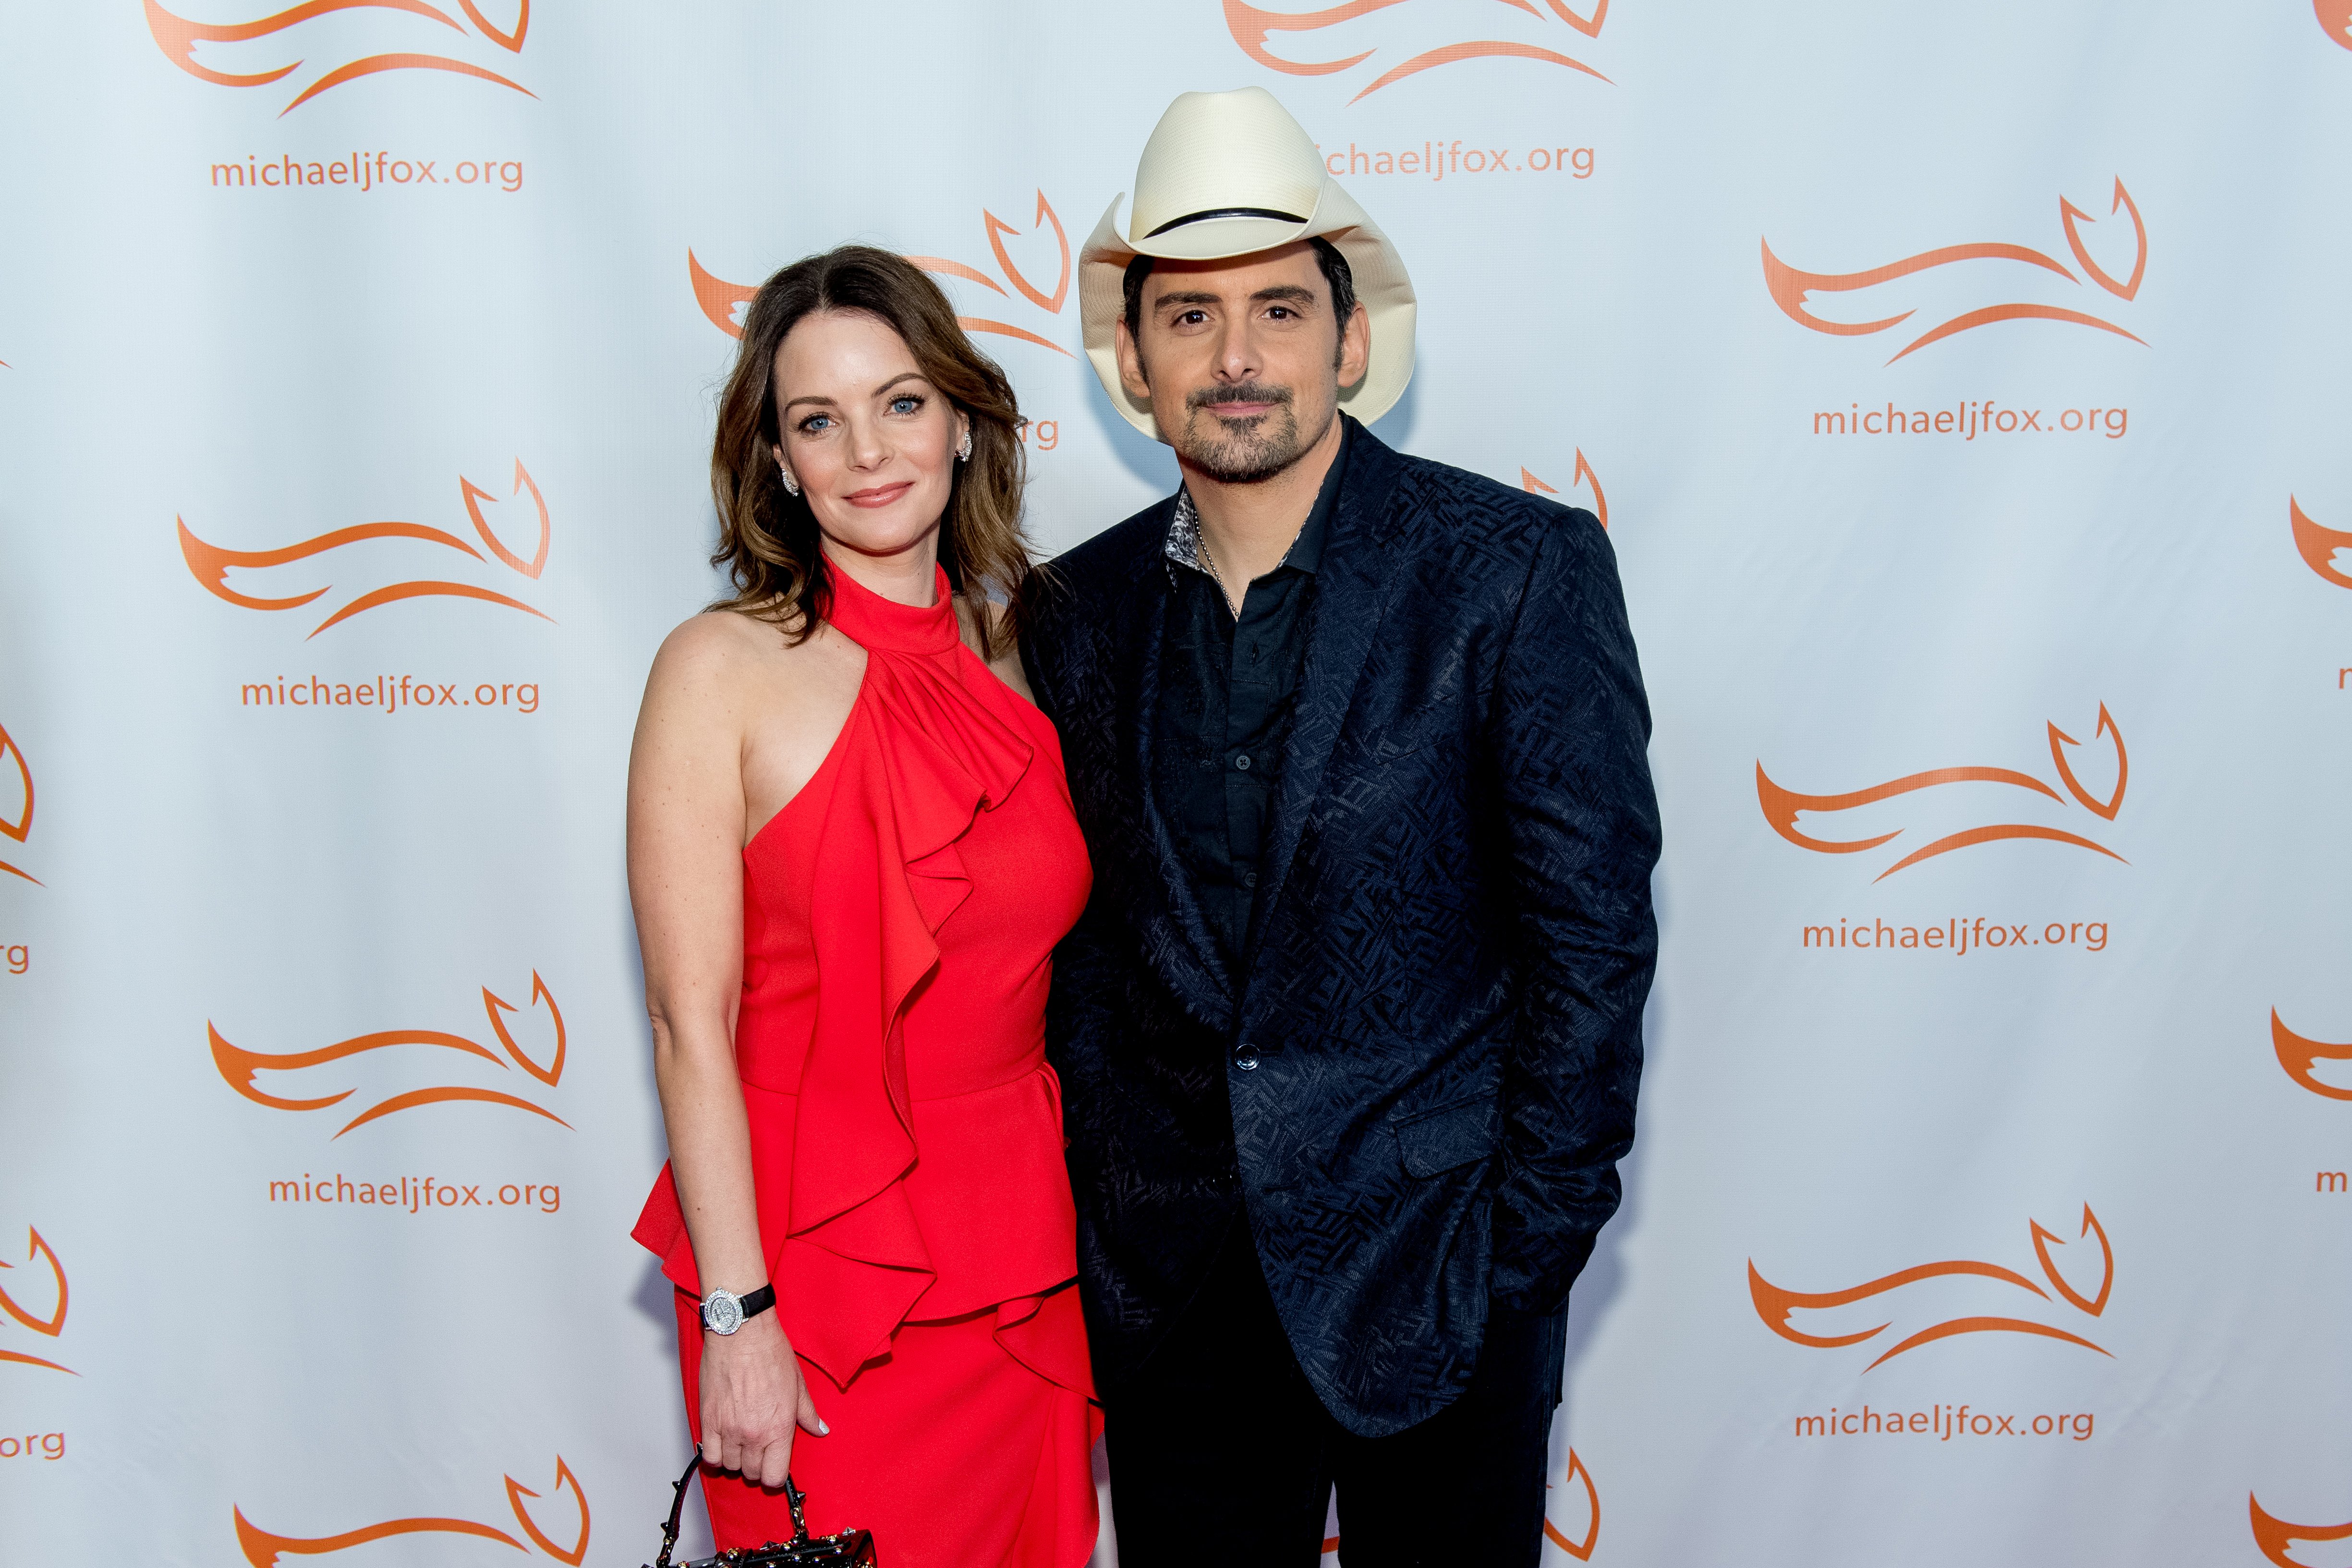 Kimberly Williams-Paisley and Brad Paisley attend the 2017 "A Funny Thing Happened on the Way to Cure Parkinson's" benefitting The Michael J. Fox Foundation at the Hilton New York on November 11, 2017 in New York City. | Source: Getty Images